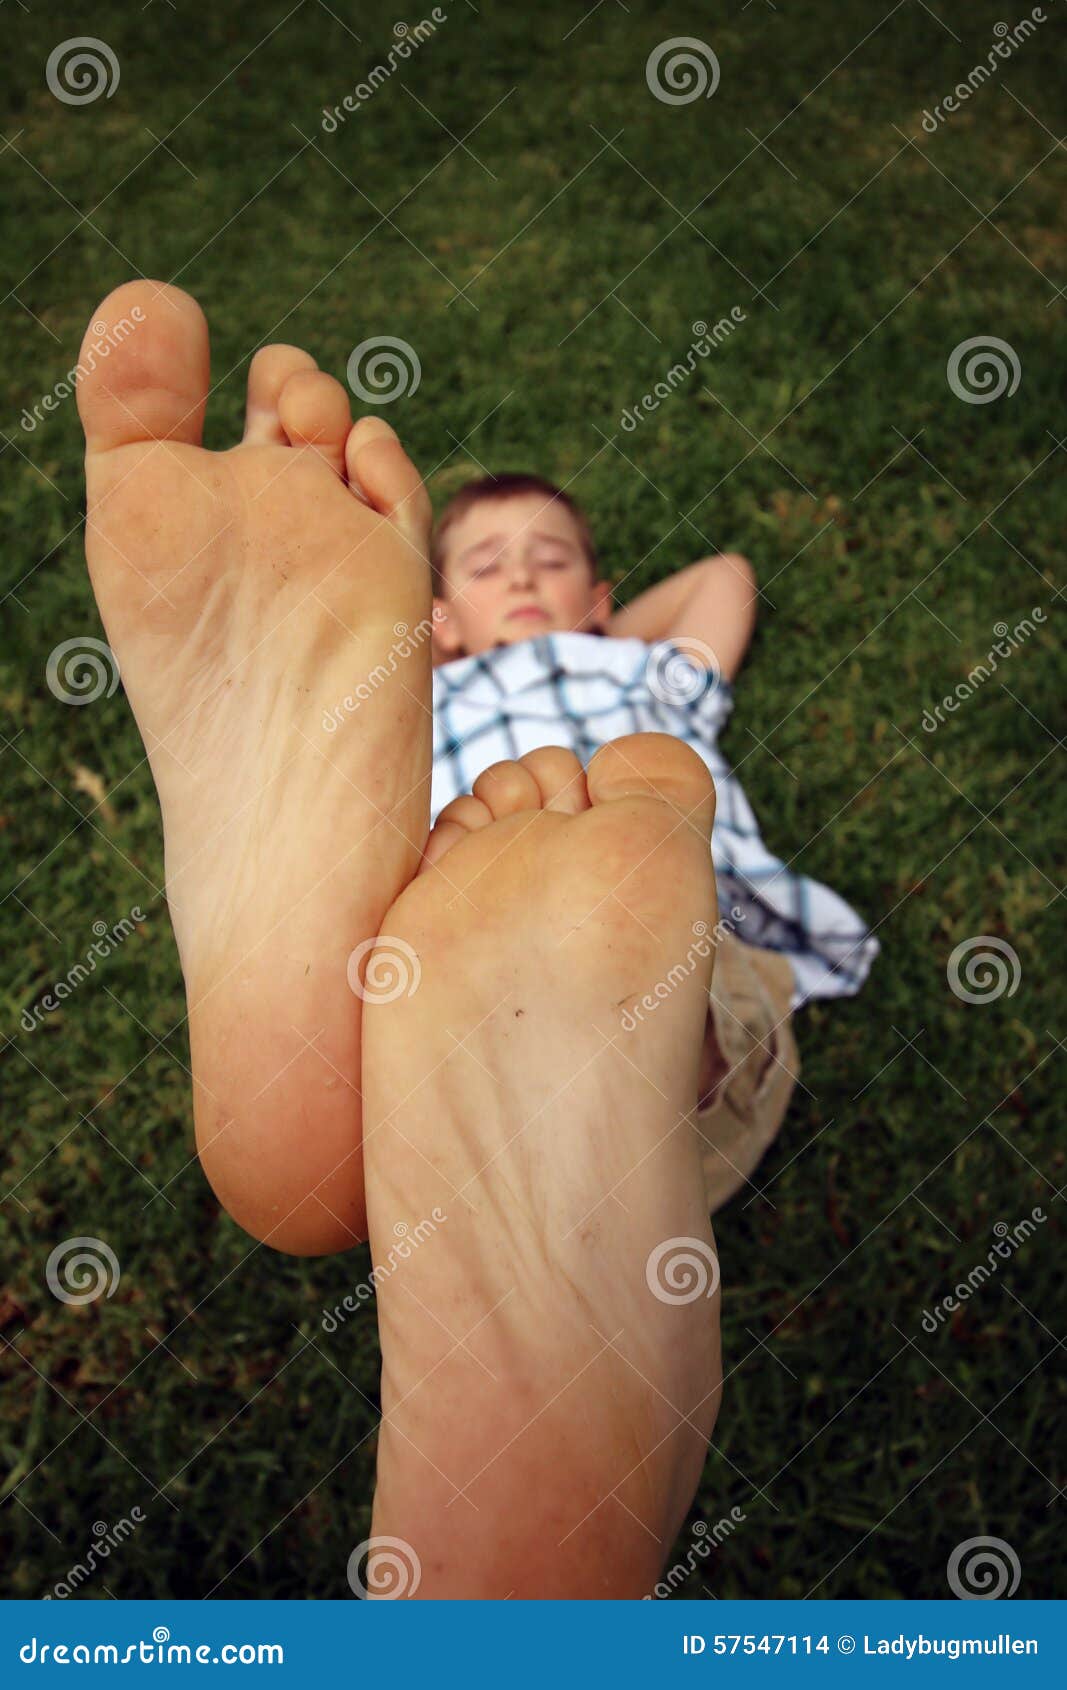 boy with his feet together in the air